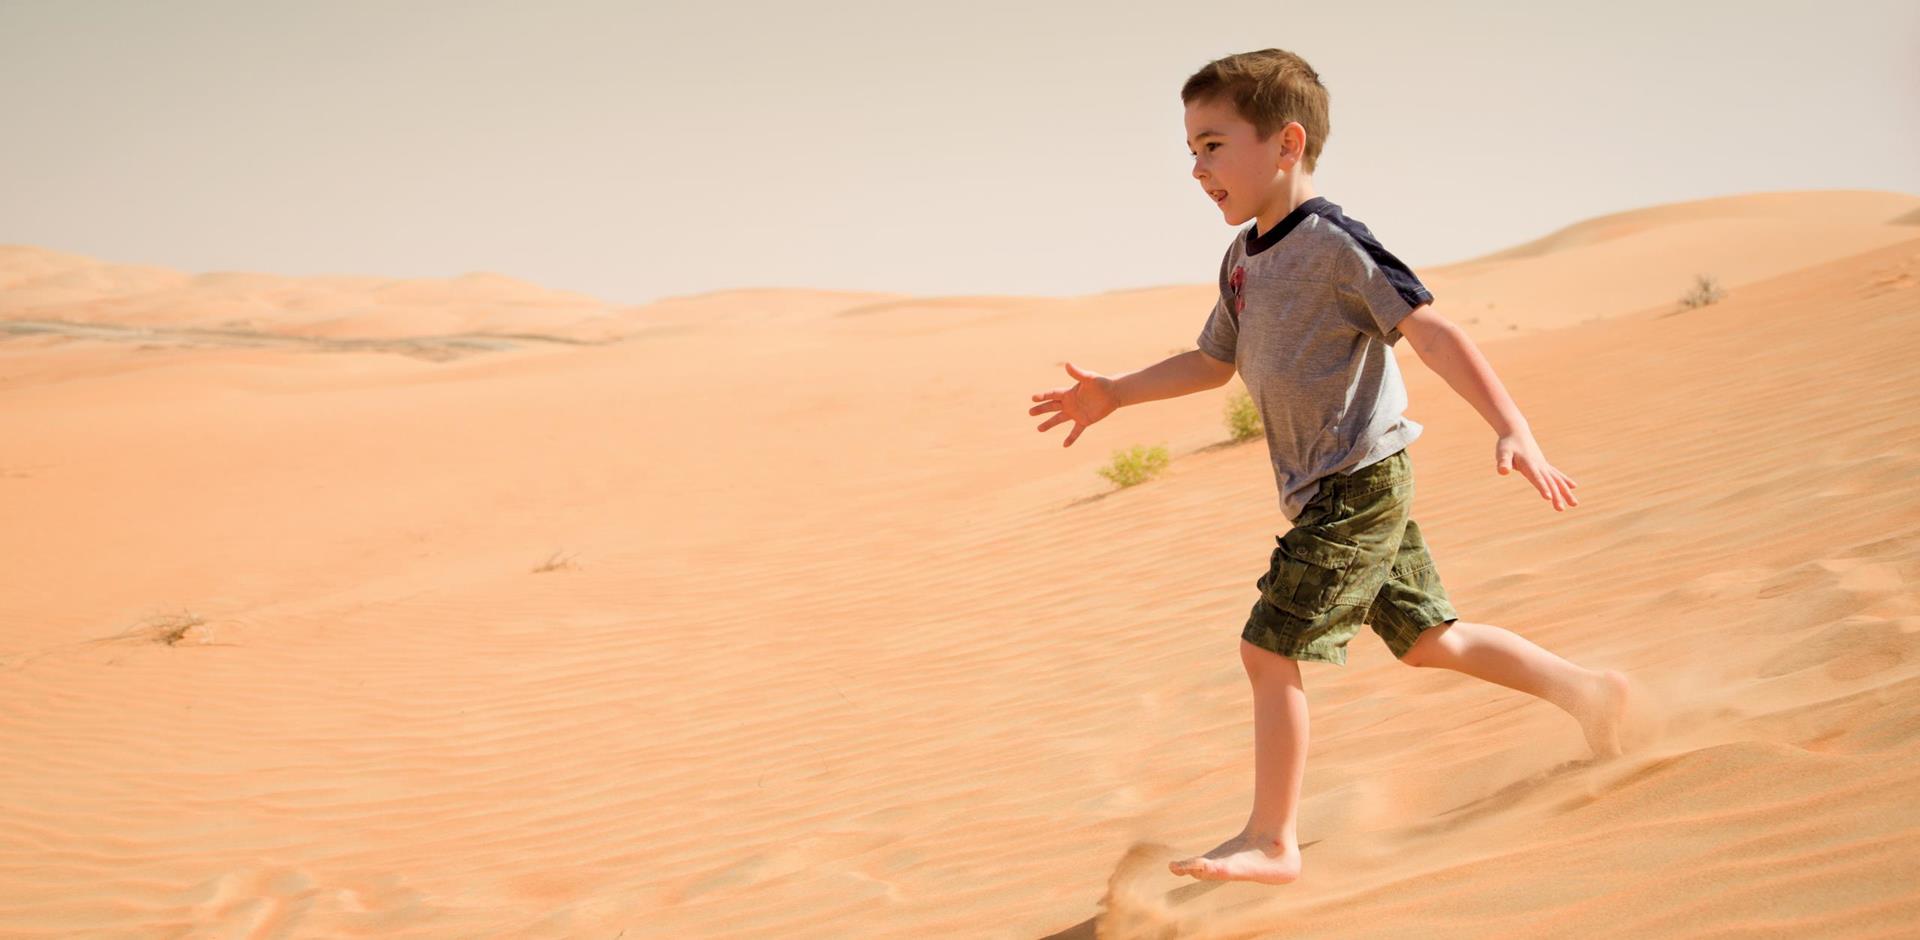 Win a family trip to Oman